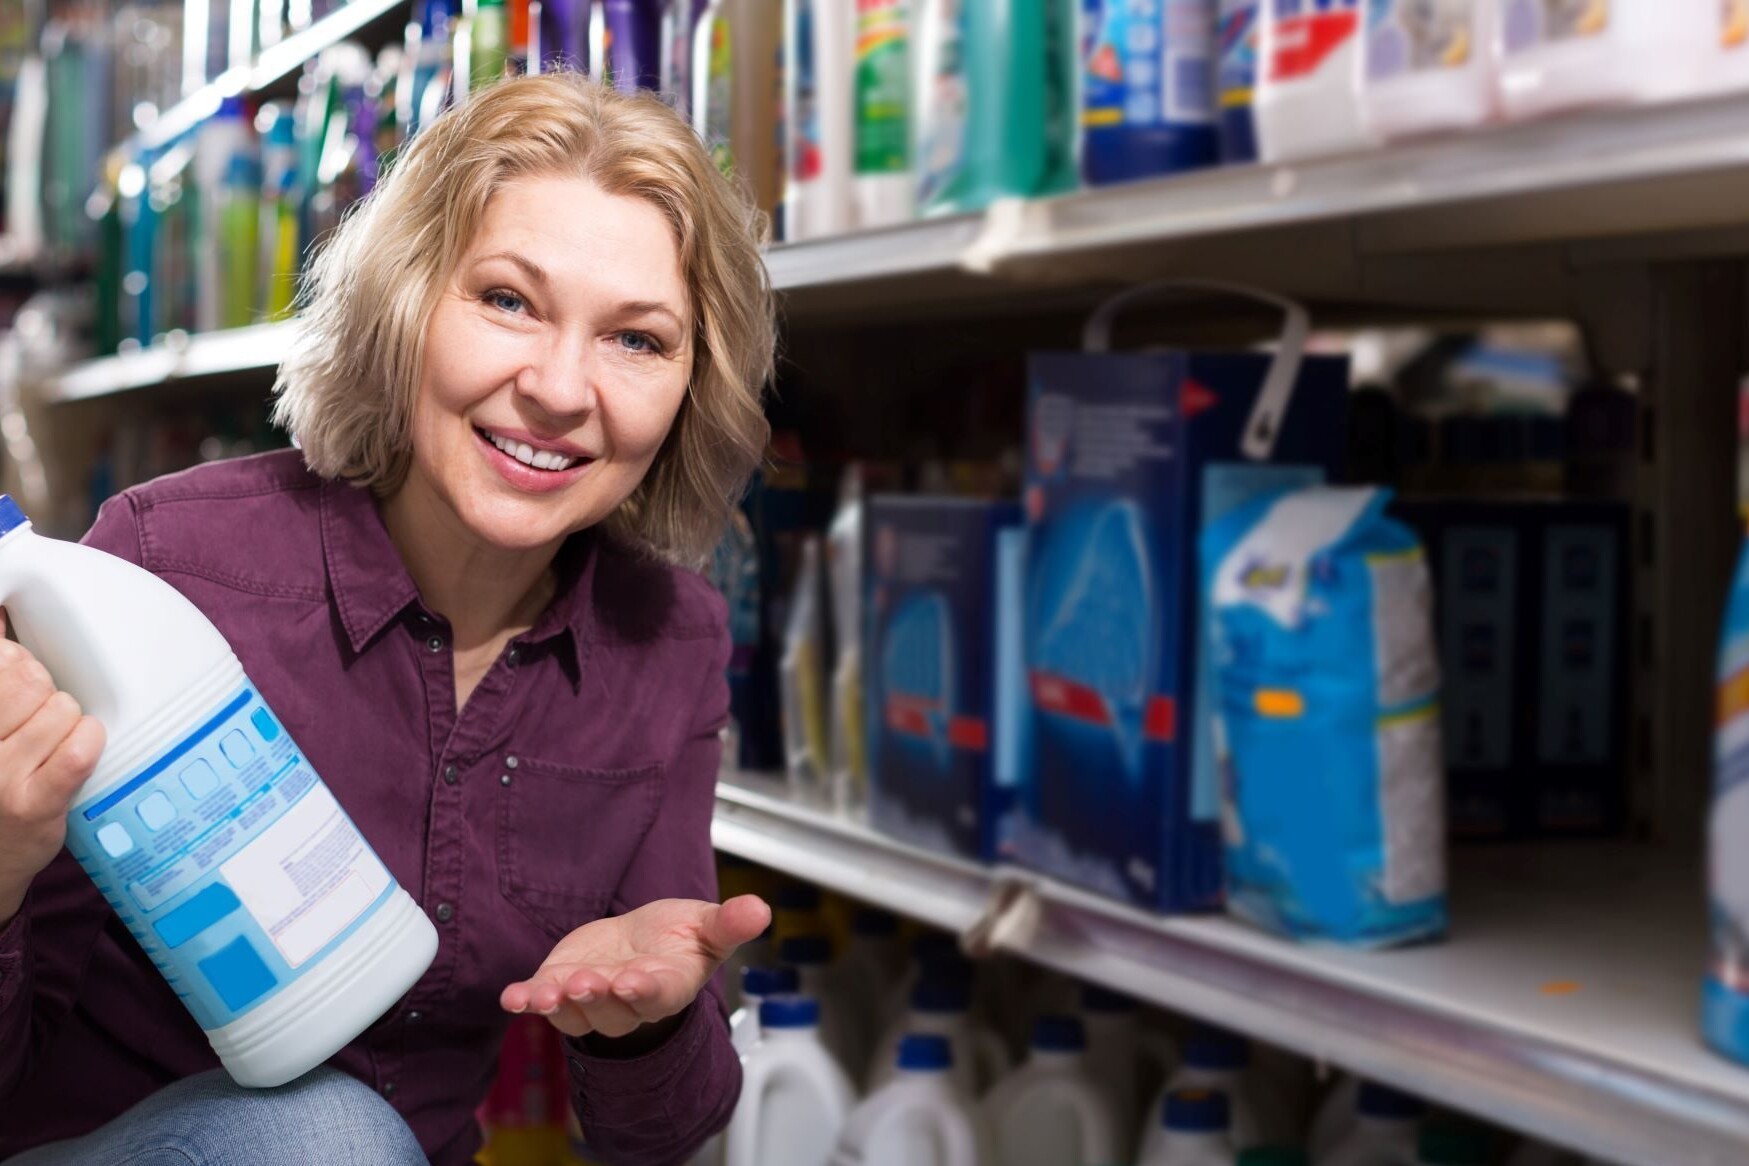 Woman consumer shops for laundry detergent in the supermarket.